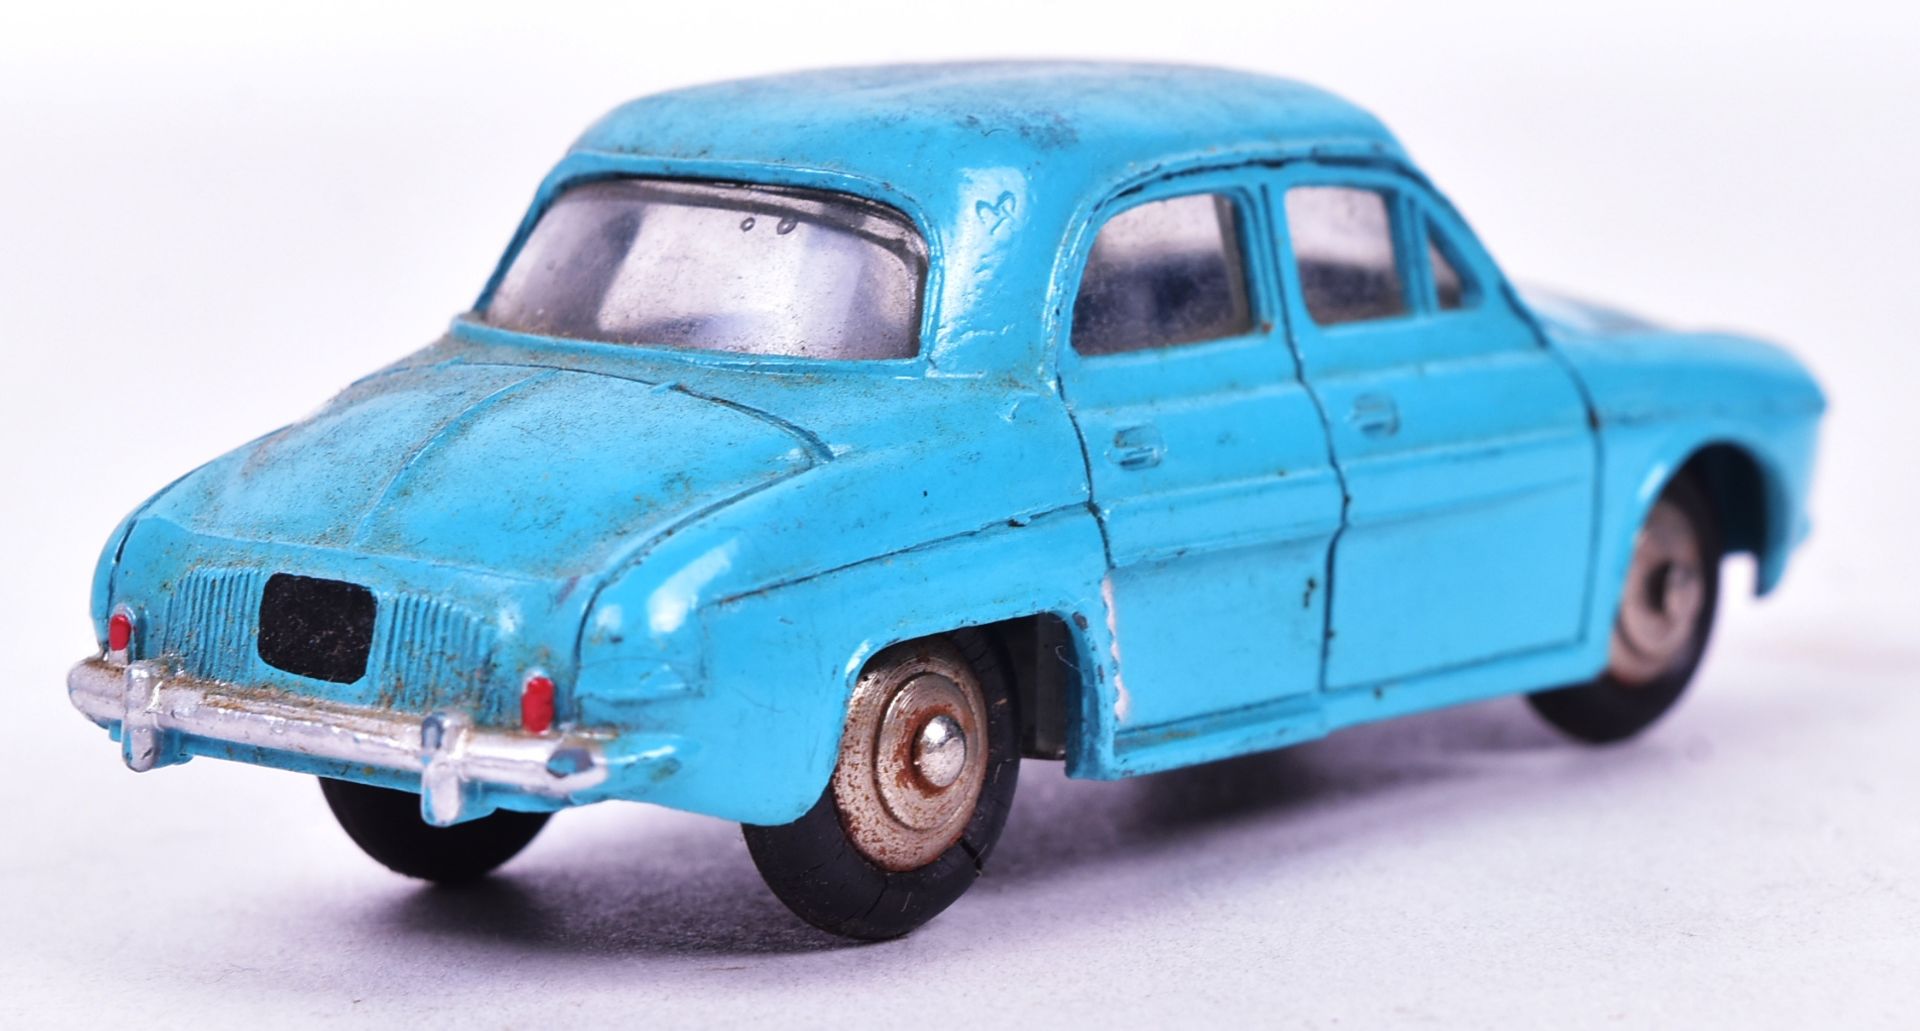 DIECAST - FRENCH DINKY TOYS - RENAULT DAUPHINE - Image 3 of 5